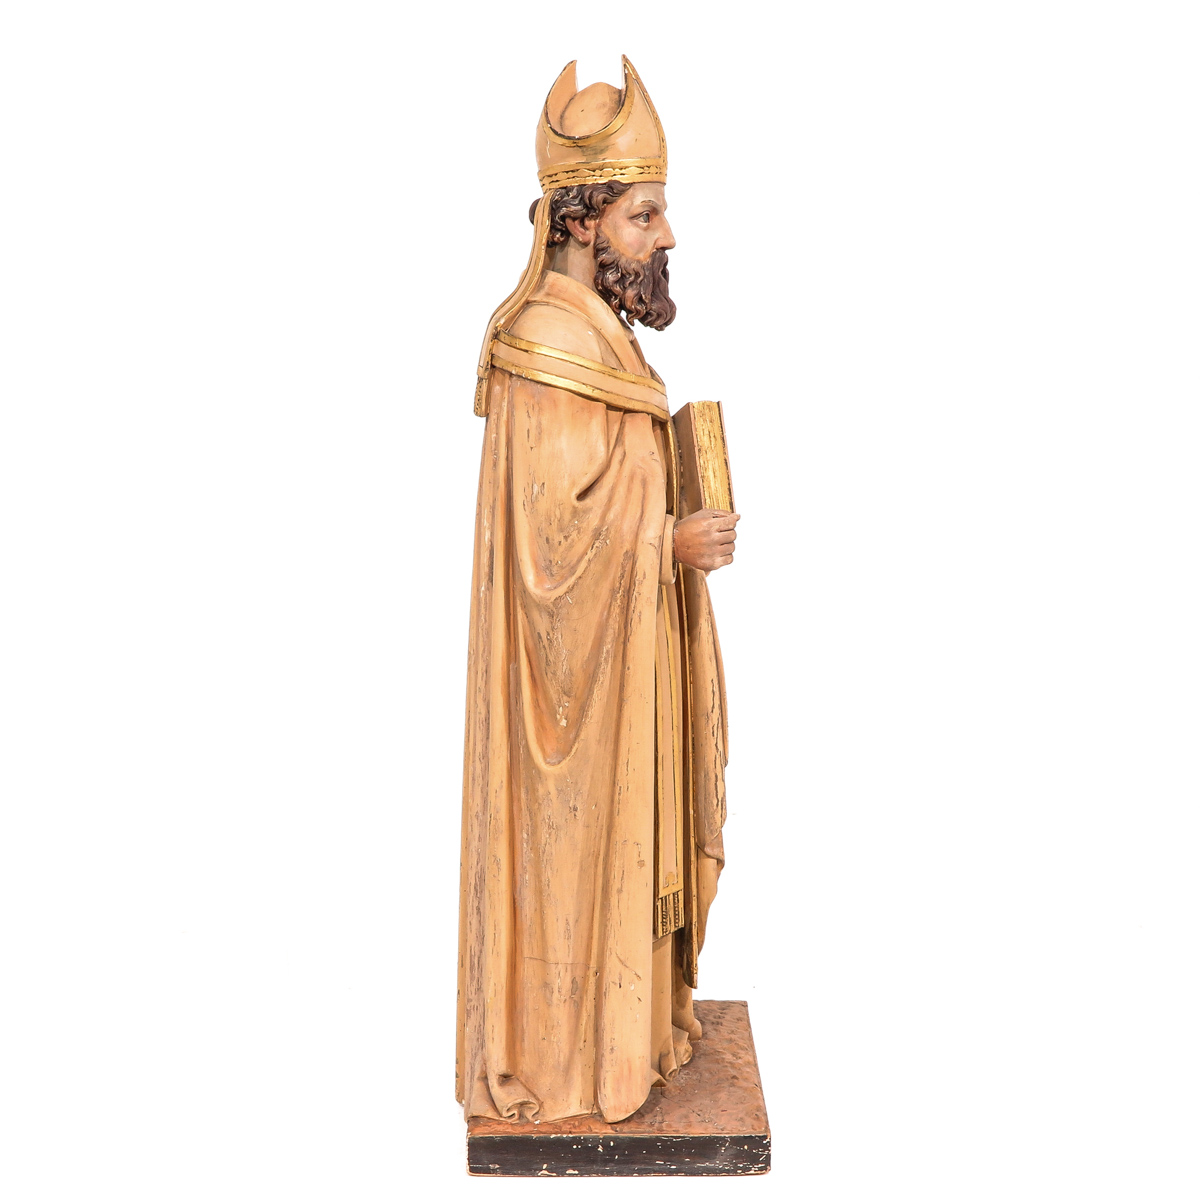 A 19th Century Sculpture of Saint Augustine - Image 4 of 10